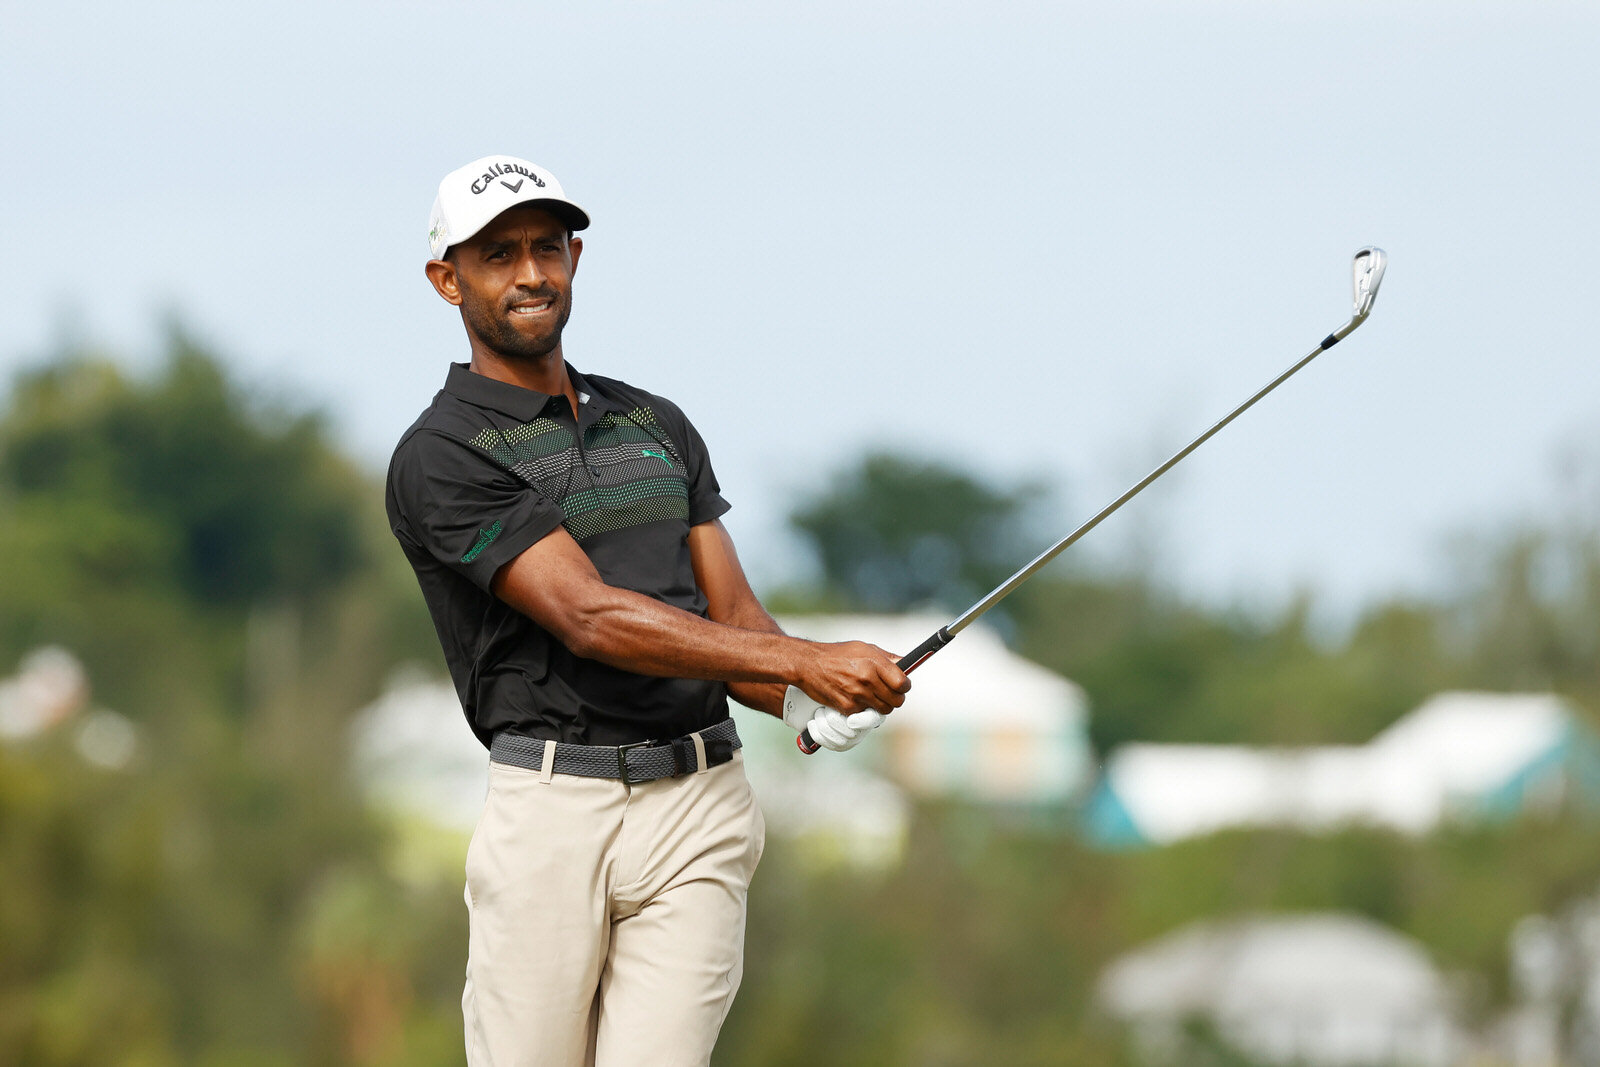  SOUTHAMPTON, BERMUDA - OCTOBER 29:  Camiko Smith of Bermuda plays his shot from the tenth tee during the first round of the Bermuda Championship at Port Royal Golf Course on October 29, 2020 in Southampton, Bermuda. (Photo by Gregory Shamus/Getty Im